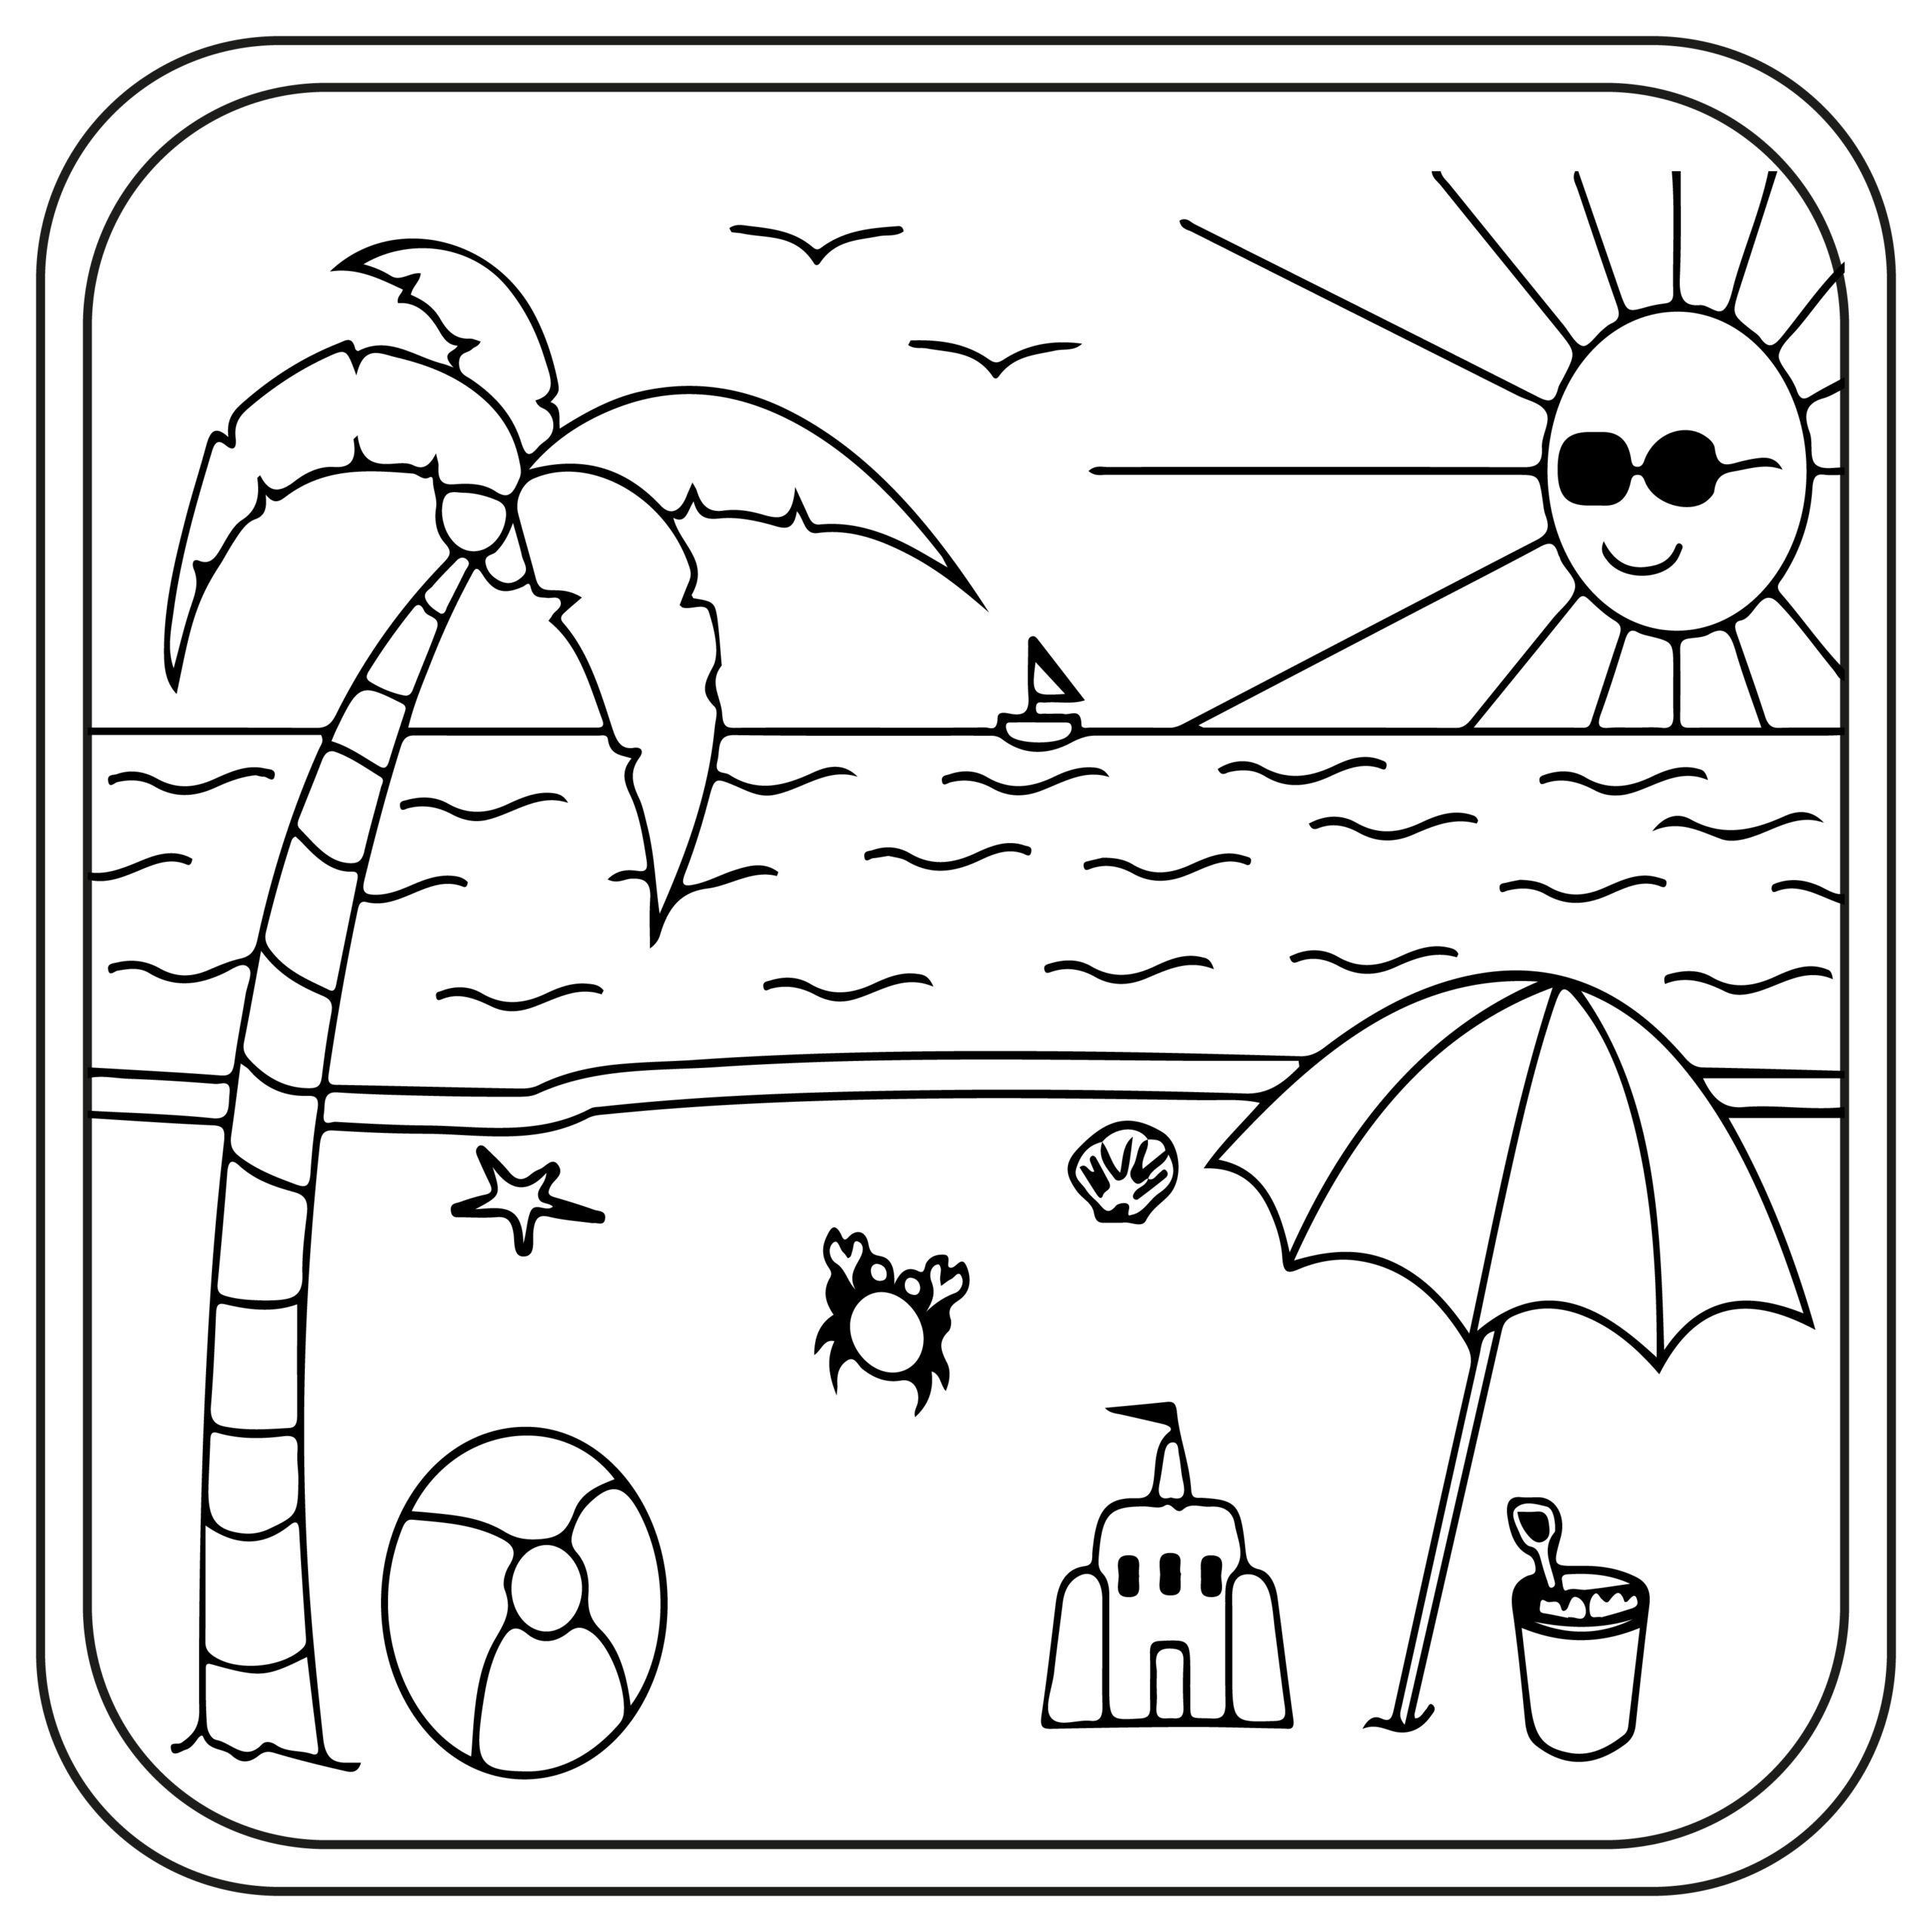 Beach Preschool coloring page - Download, Print or Color Online for Free